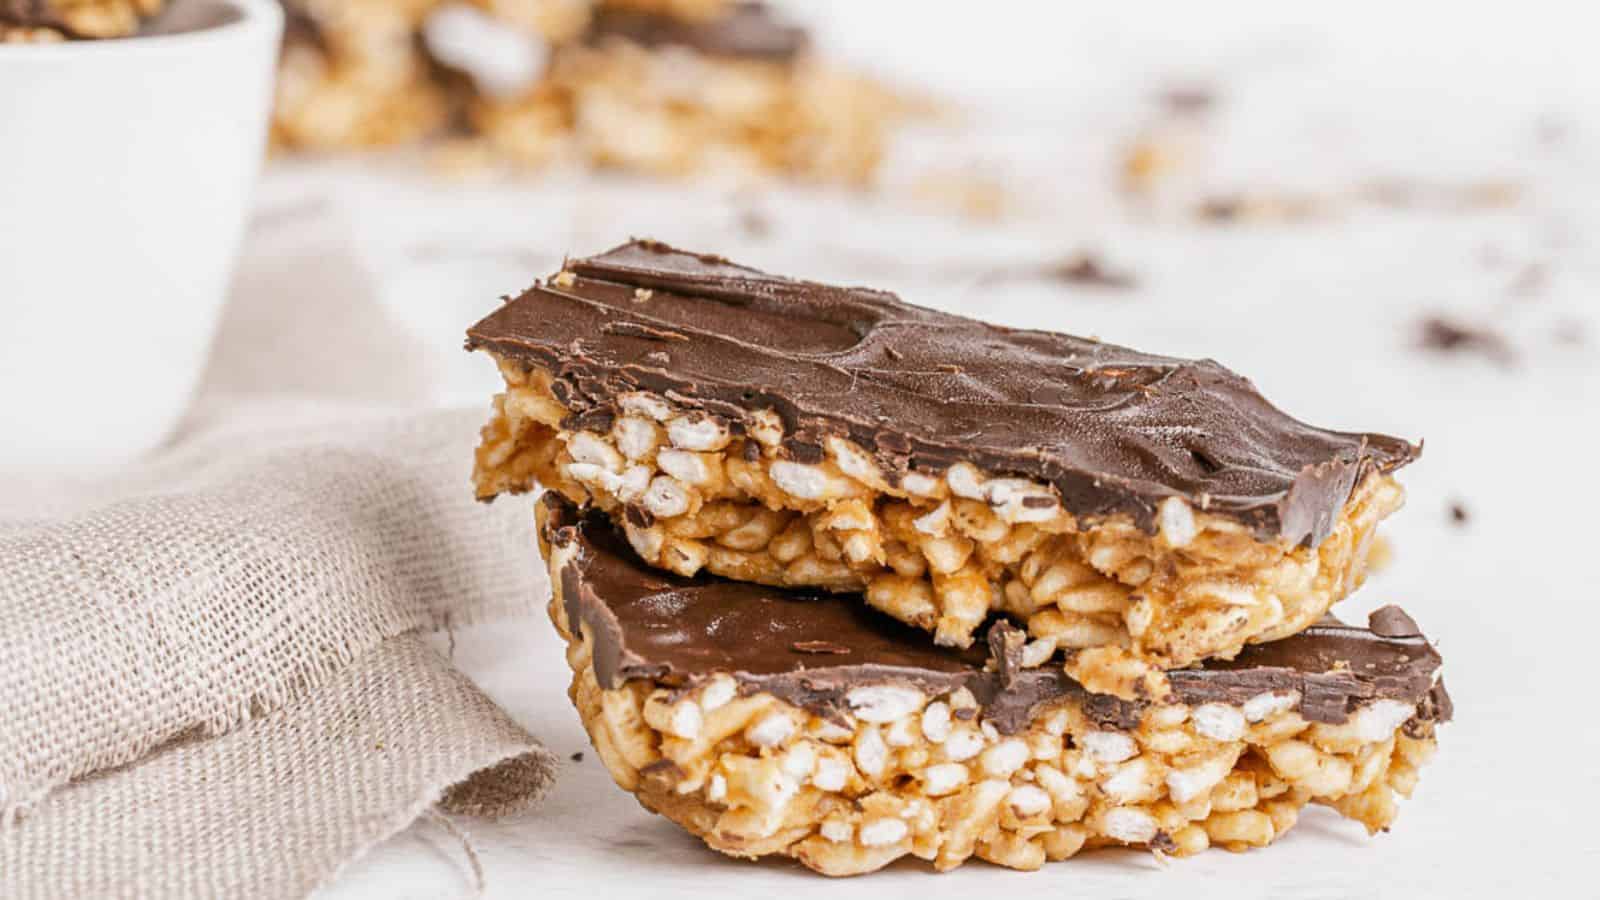 <p>Need a quick and easy dessert that’s sure to please everyone? Our vegan chocolate rice crispy treats are here to save the day! Whether you’re enjoying them as a midday snack or packing them in your lunchbox, these treats are sure to satisfy your cravings. And the best part? They’re vegan-friendly, so everyone can enjoy a taste of nostalgia!<br><strong>Get the Recipe: </strong><a href="https://twocityvegans.com/vegan-chocolate-rice-crispy-treats/?utm_source=msn&utm_medium=page&utm_campaign=msn">Vegan Chocolate Rice Crispy Treats</a></p>